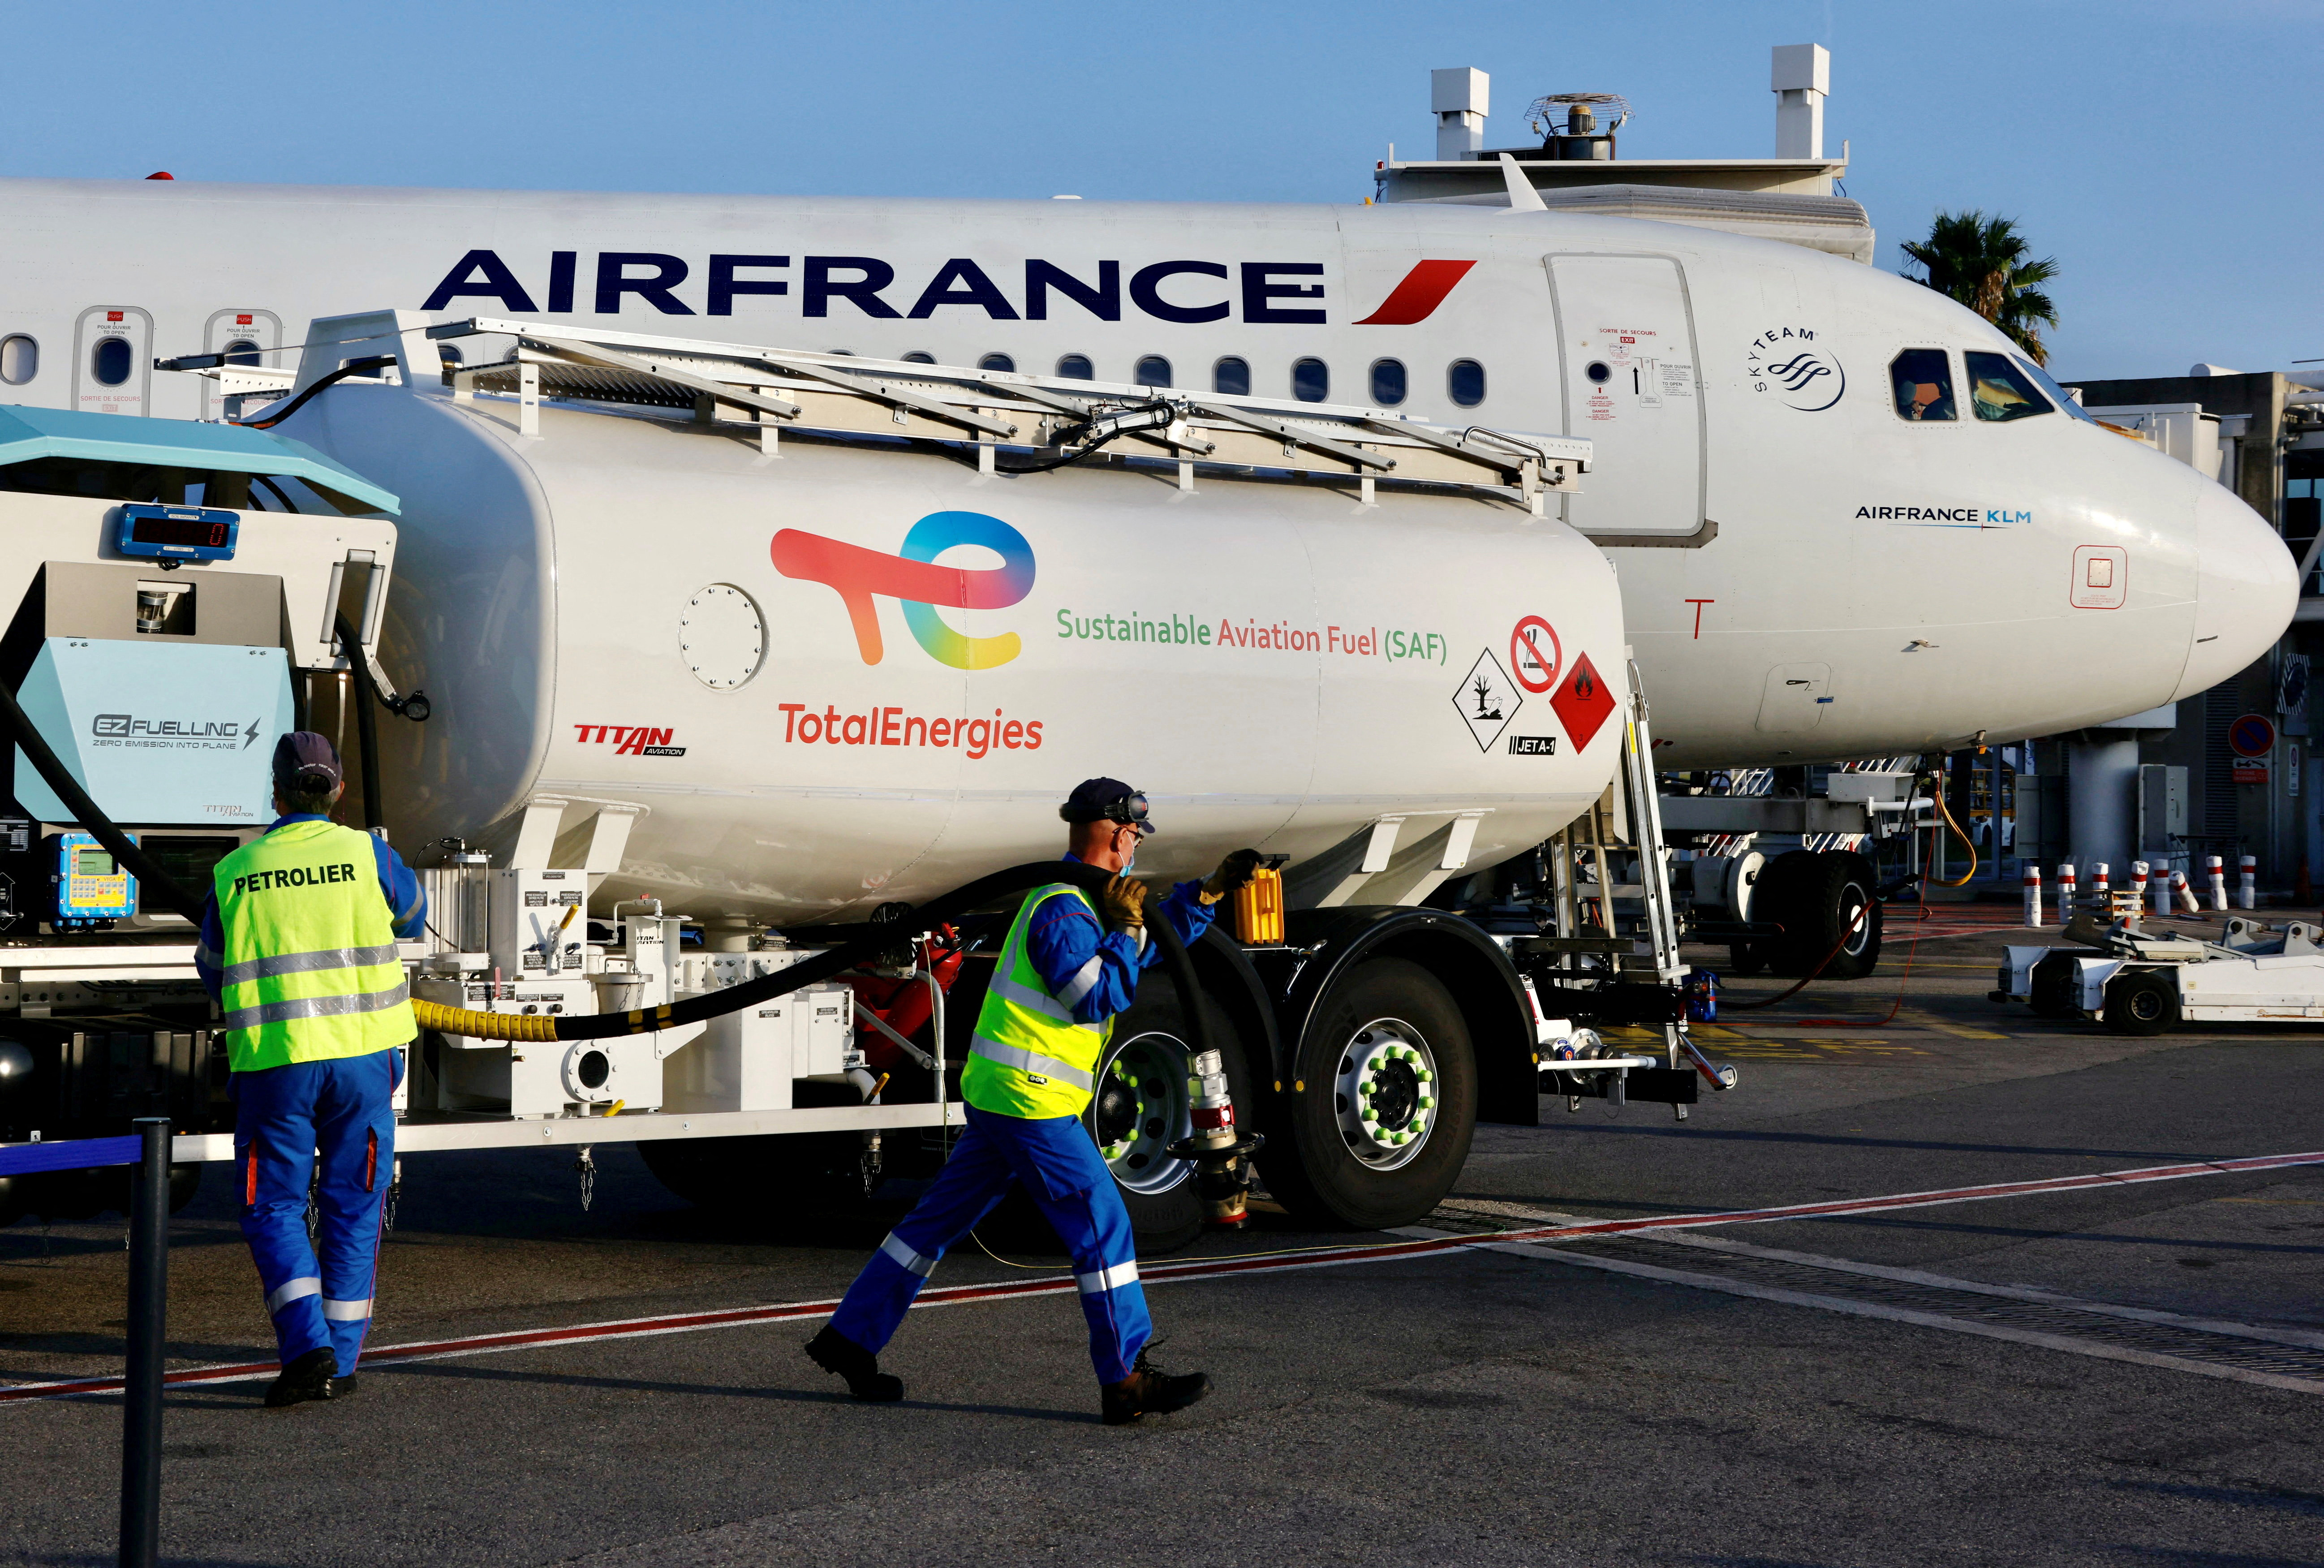 Air France aircraft, operated with SAF is refueled at Nice airport